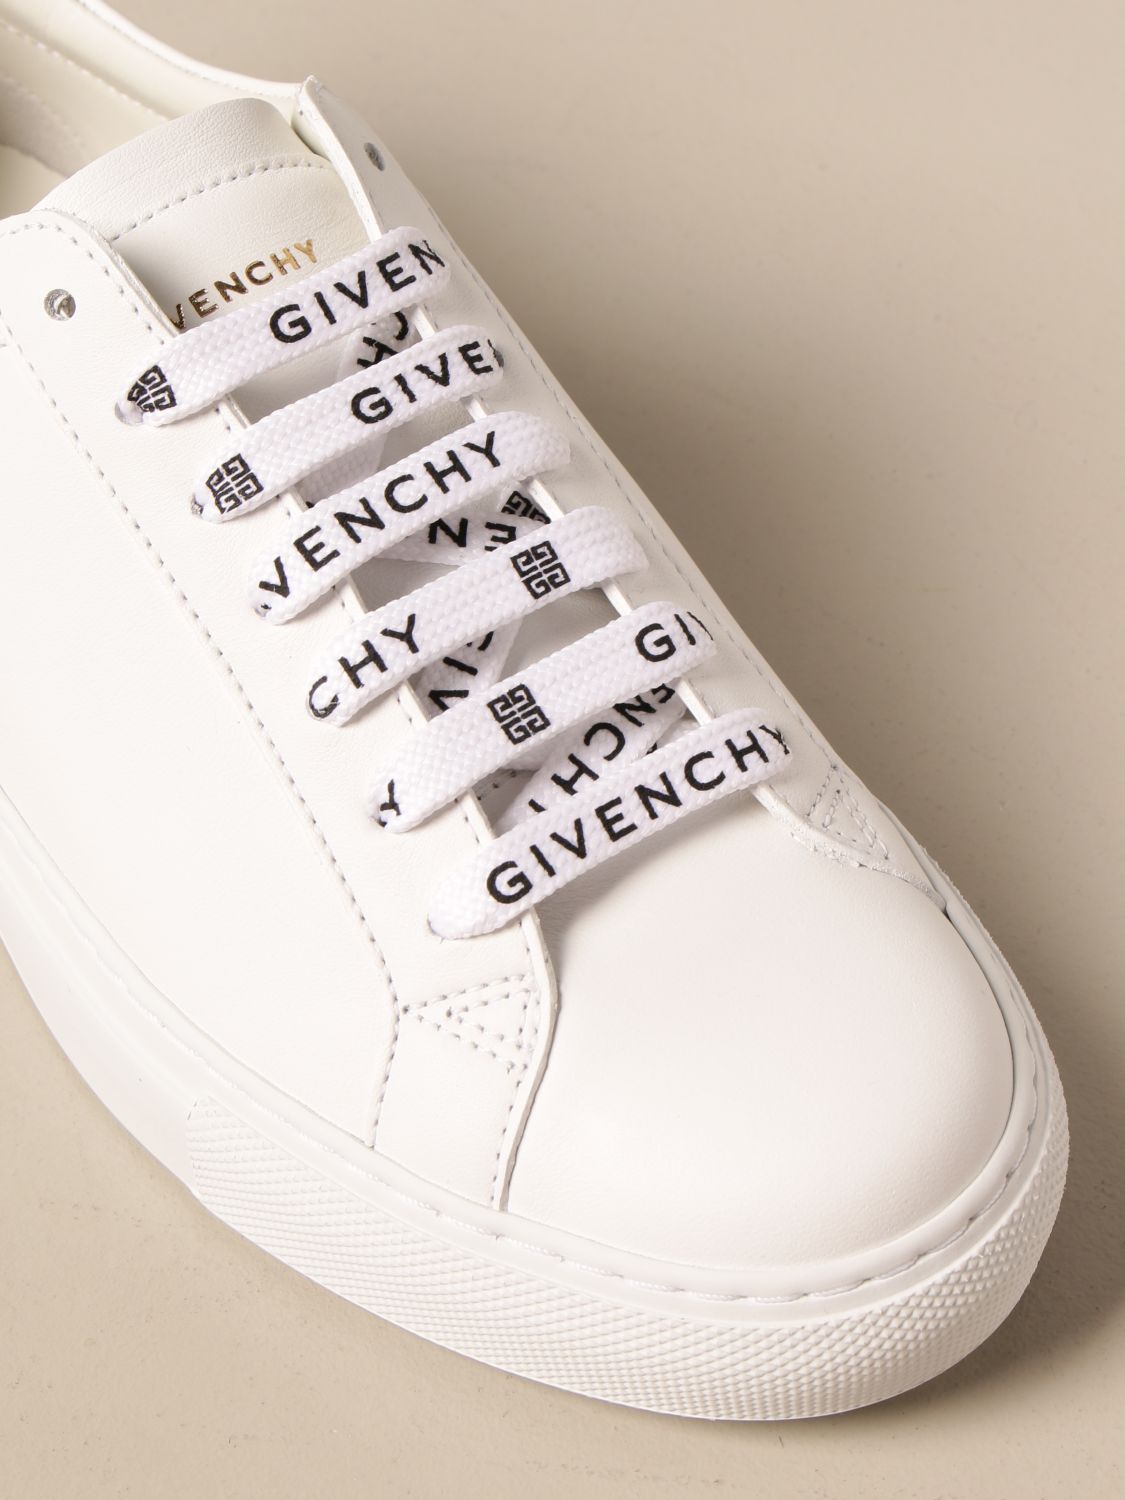 GIVENCHY: lace-up sneakers in leather with logoed laces | Sneakers Givenchy  Women White | Sneakers Givenchy BE0003E0GC Giglio EN